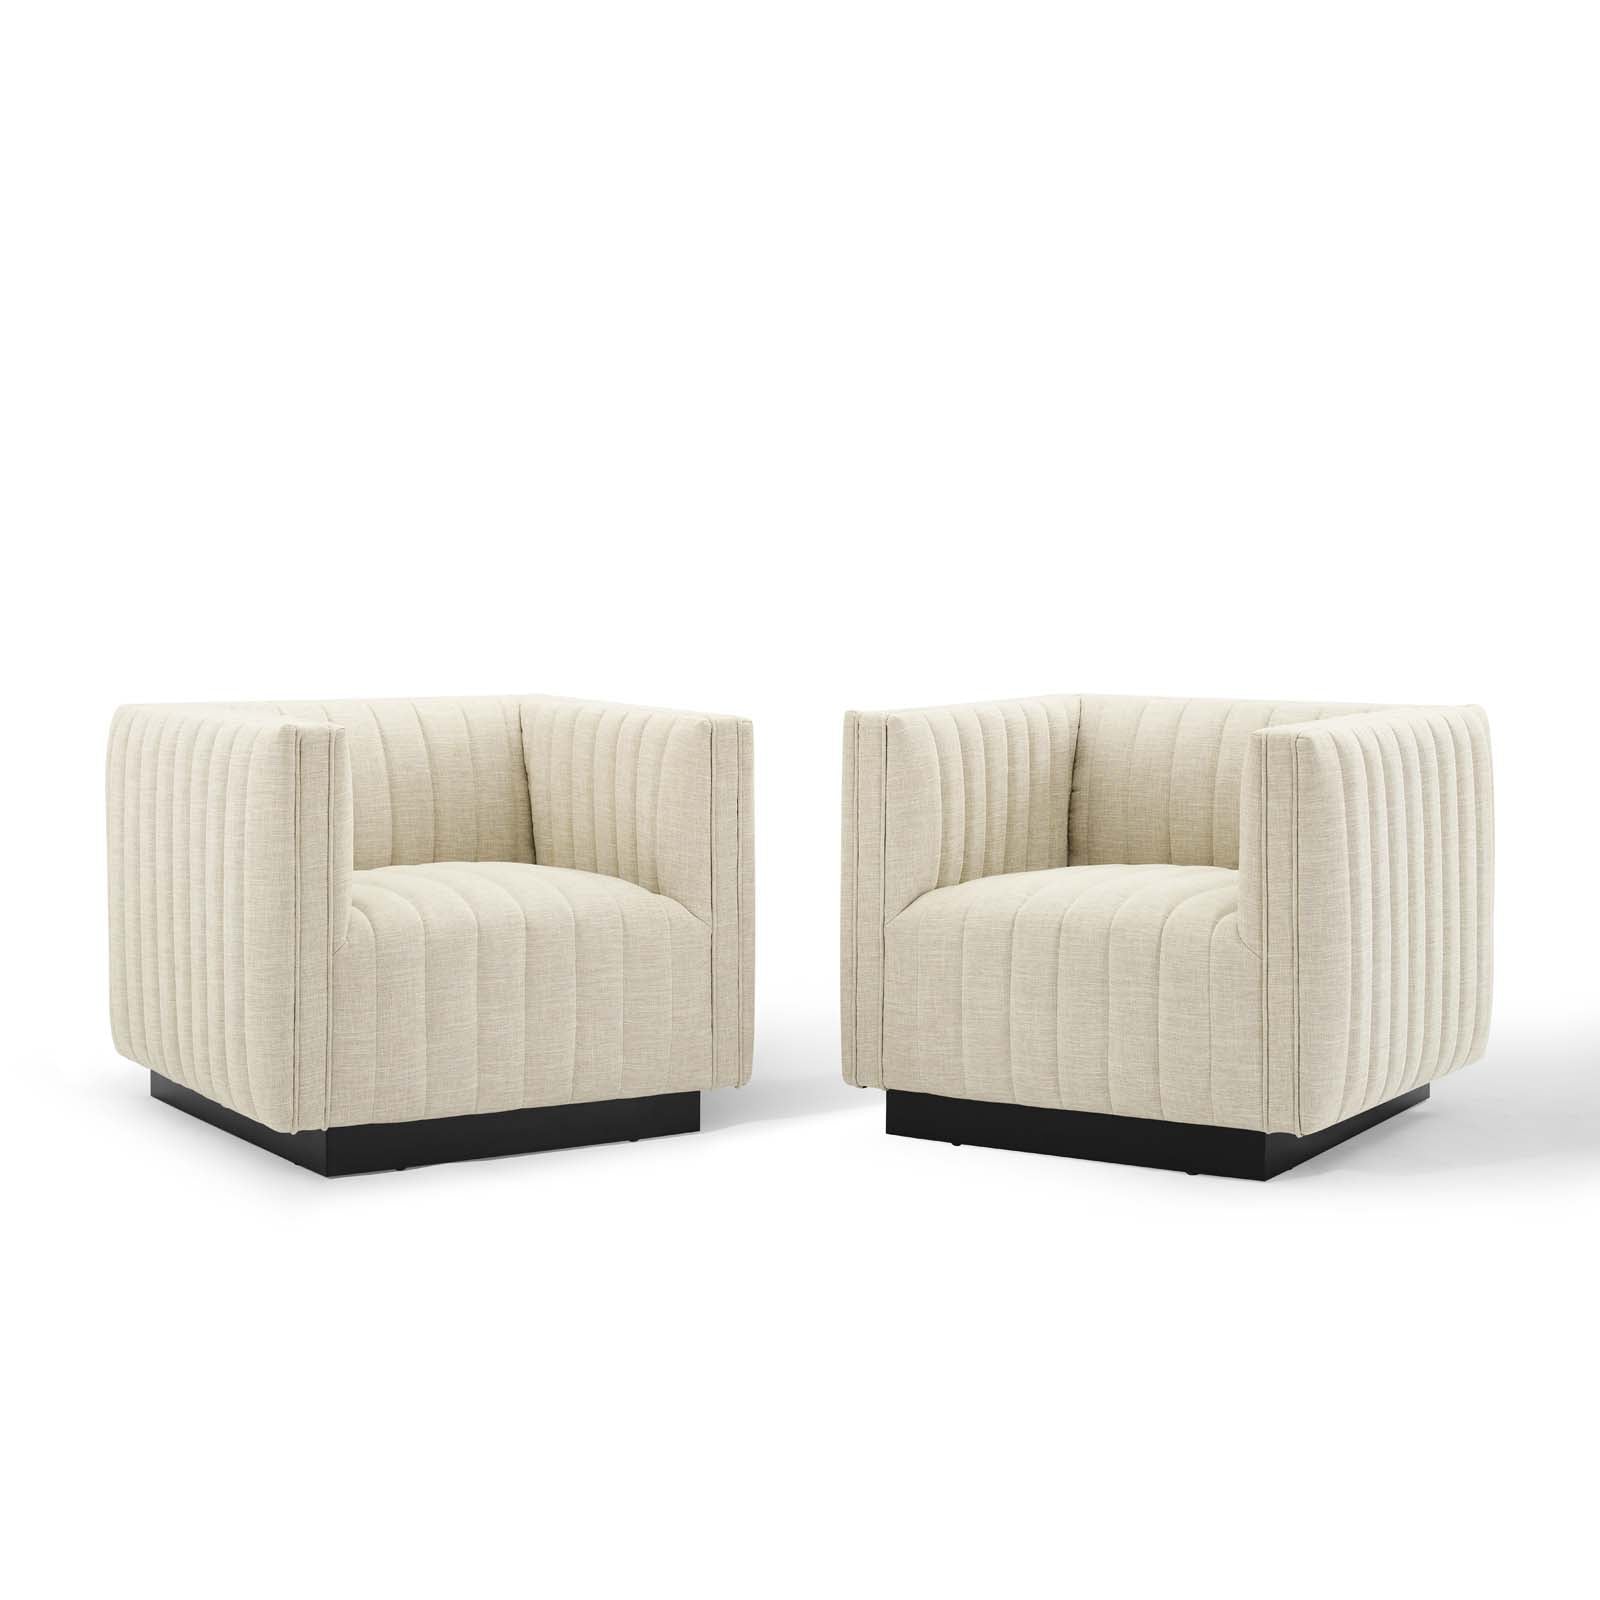 Conjure Tufted Armchair Upholstered Fabric Set of 2 - East Shore Modern Home Furnishings